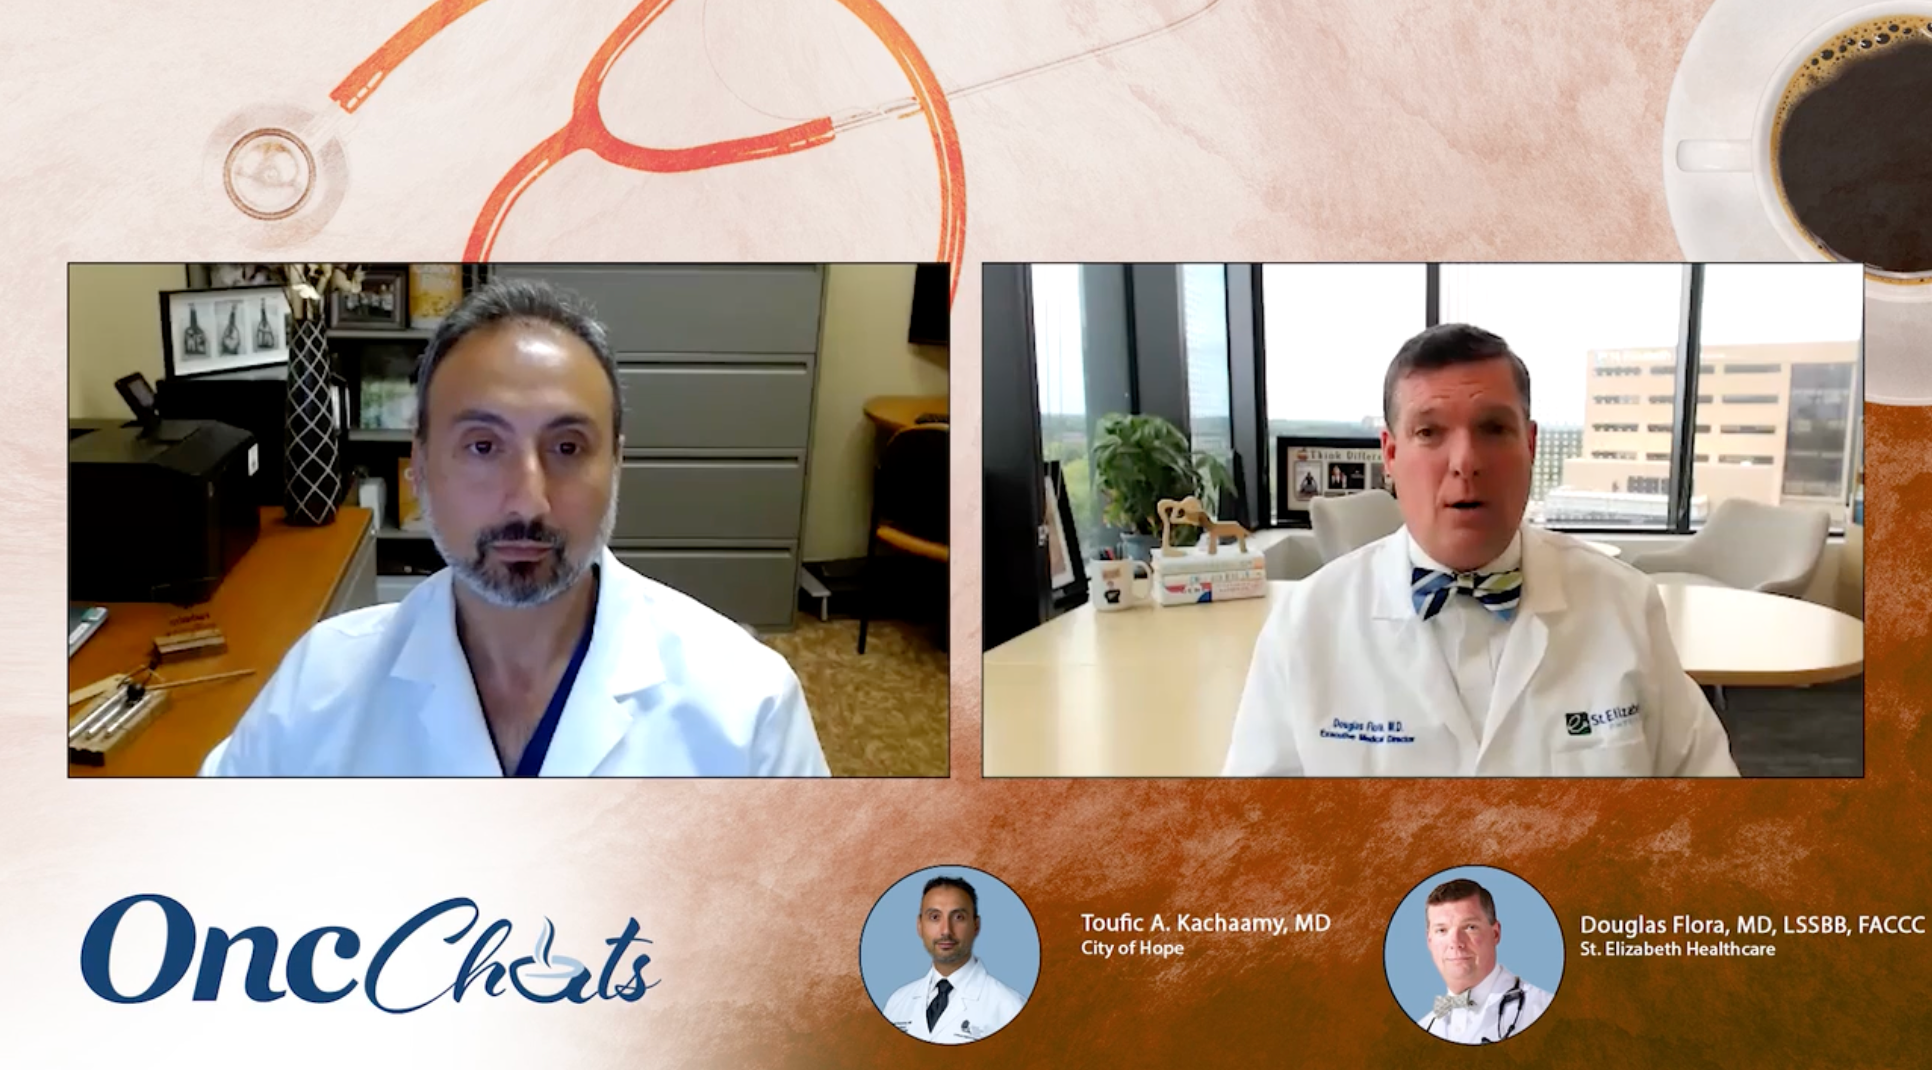 In this sixth episode of OncChats: Assessing the Promise of AI in Oncology, Toufic A. Kachaamy, MD, and Douglas Flora, MD, LSSBB, FACCC, discuss potential opportunities to leverage artificial intelligence tools in cancer screening, diagnosis, staging, and prognosis.